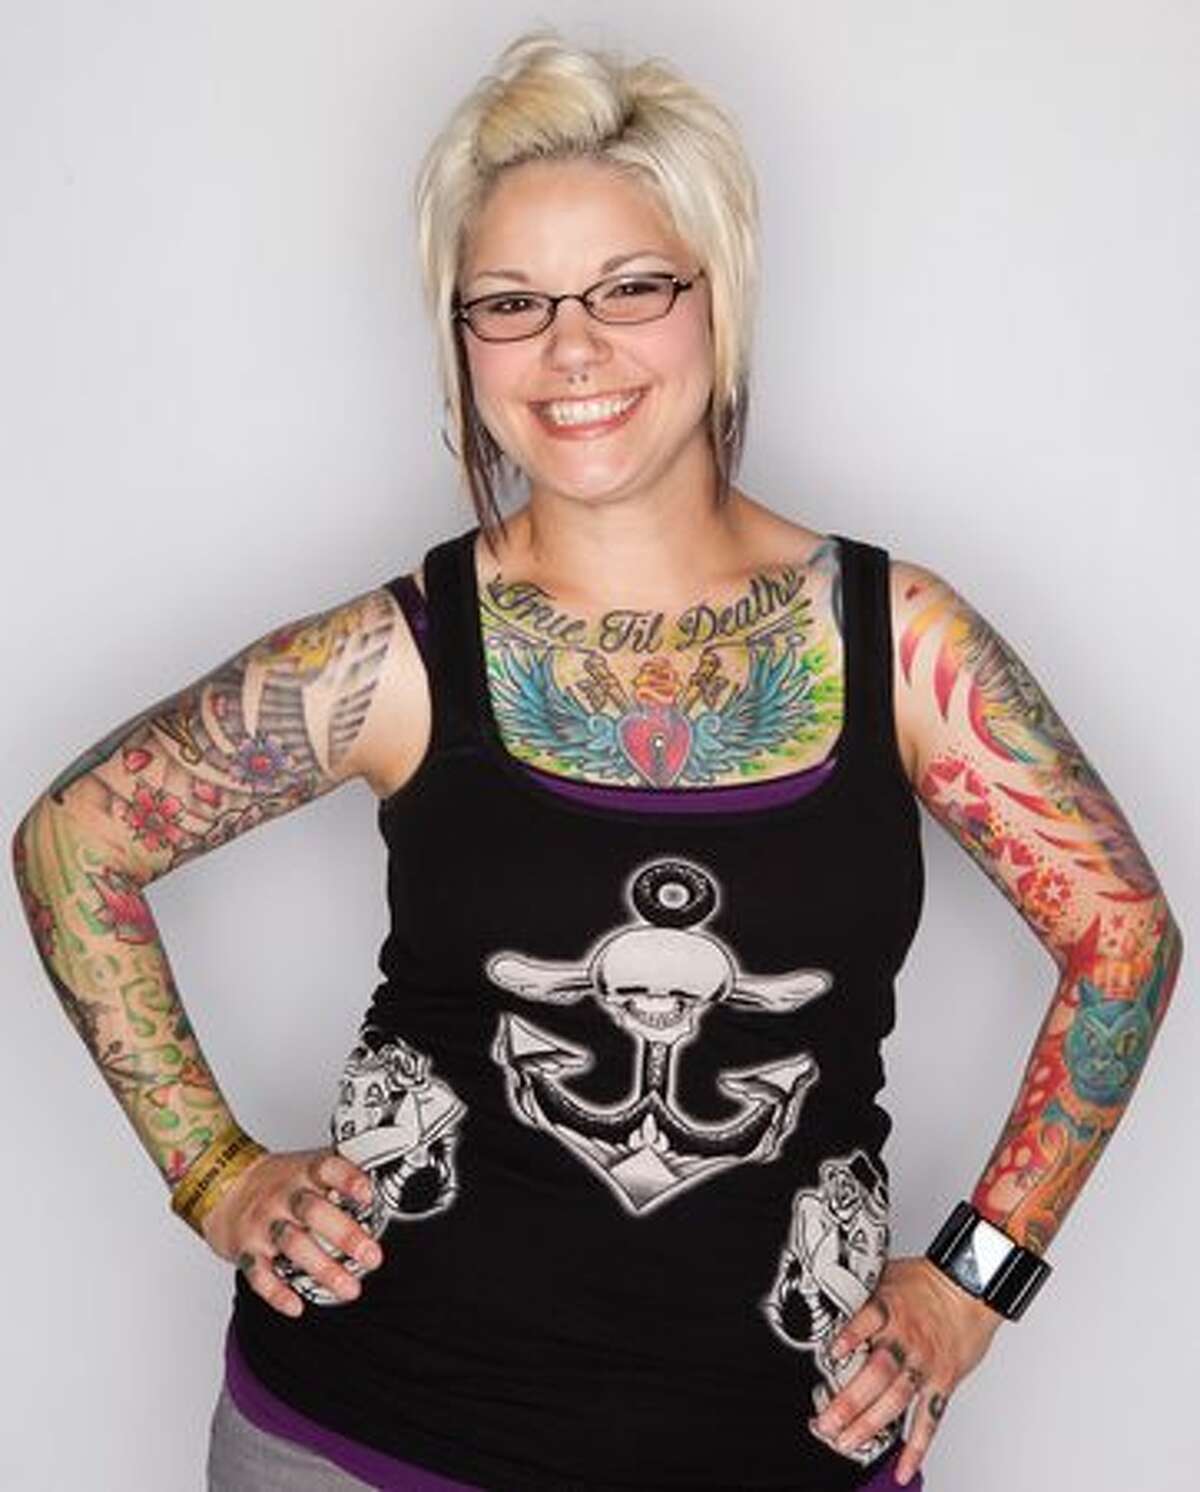 Jodi Campbell shows her tattoos on Saturday at the Tattoo Expo. Campbell is a veterinary technician and some of her tattoos reflect her love of animals.